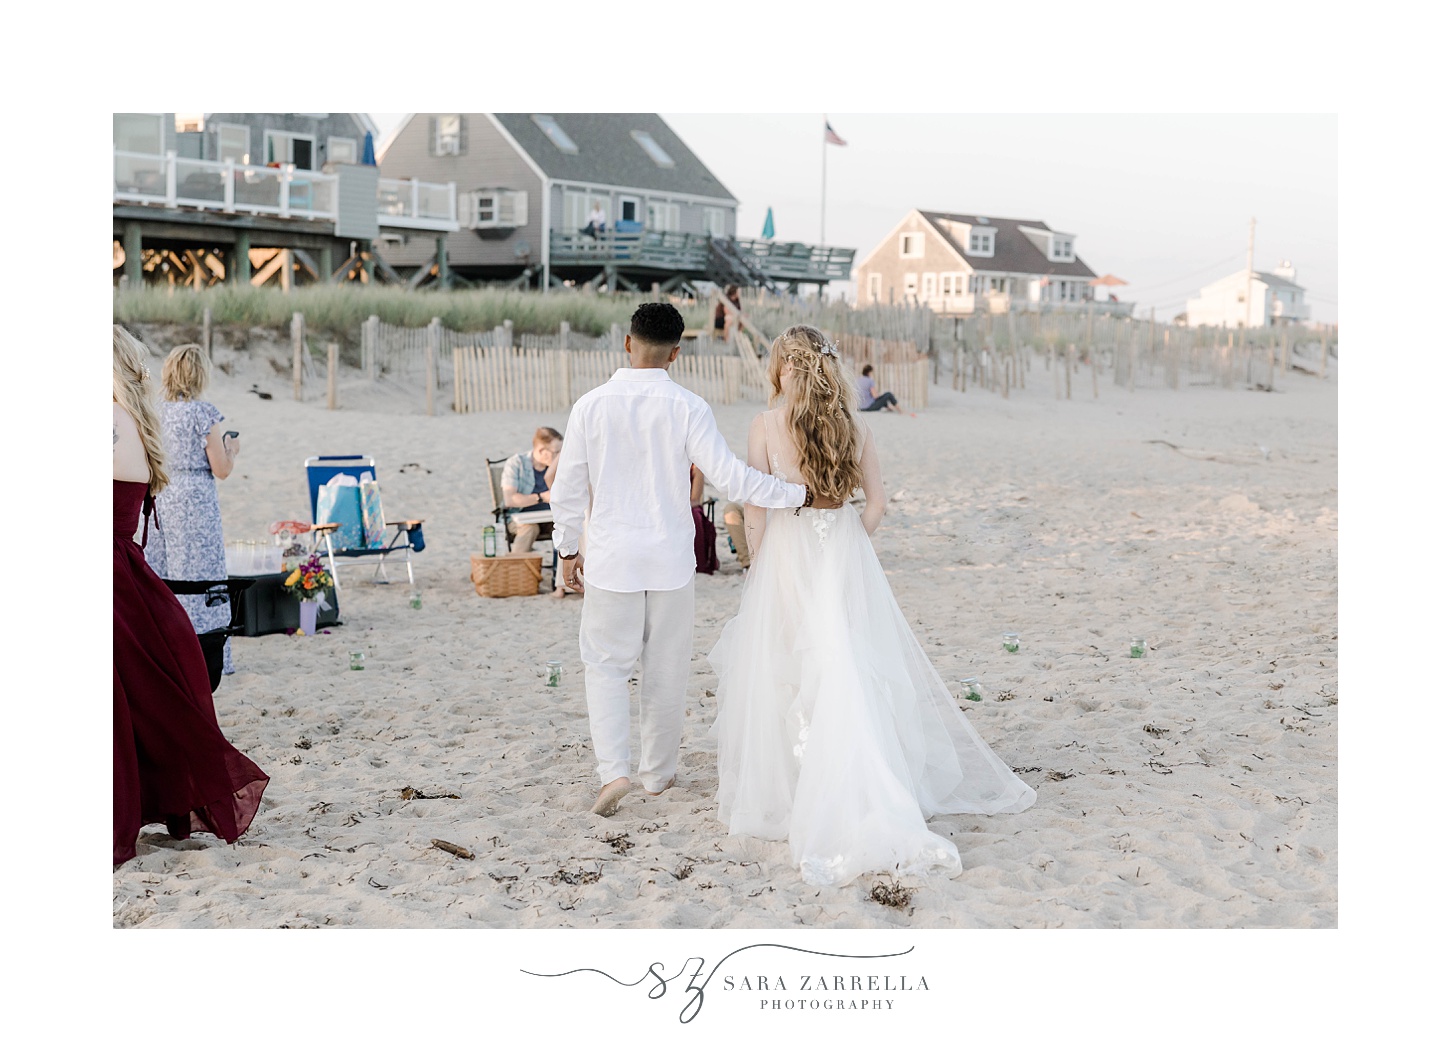 newlyweds walk towards guests on beach after wedding ceremony 